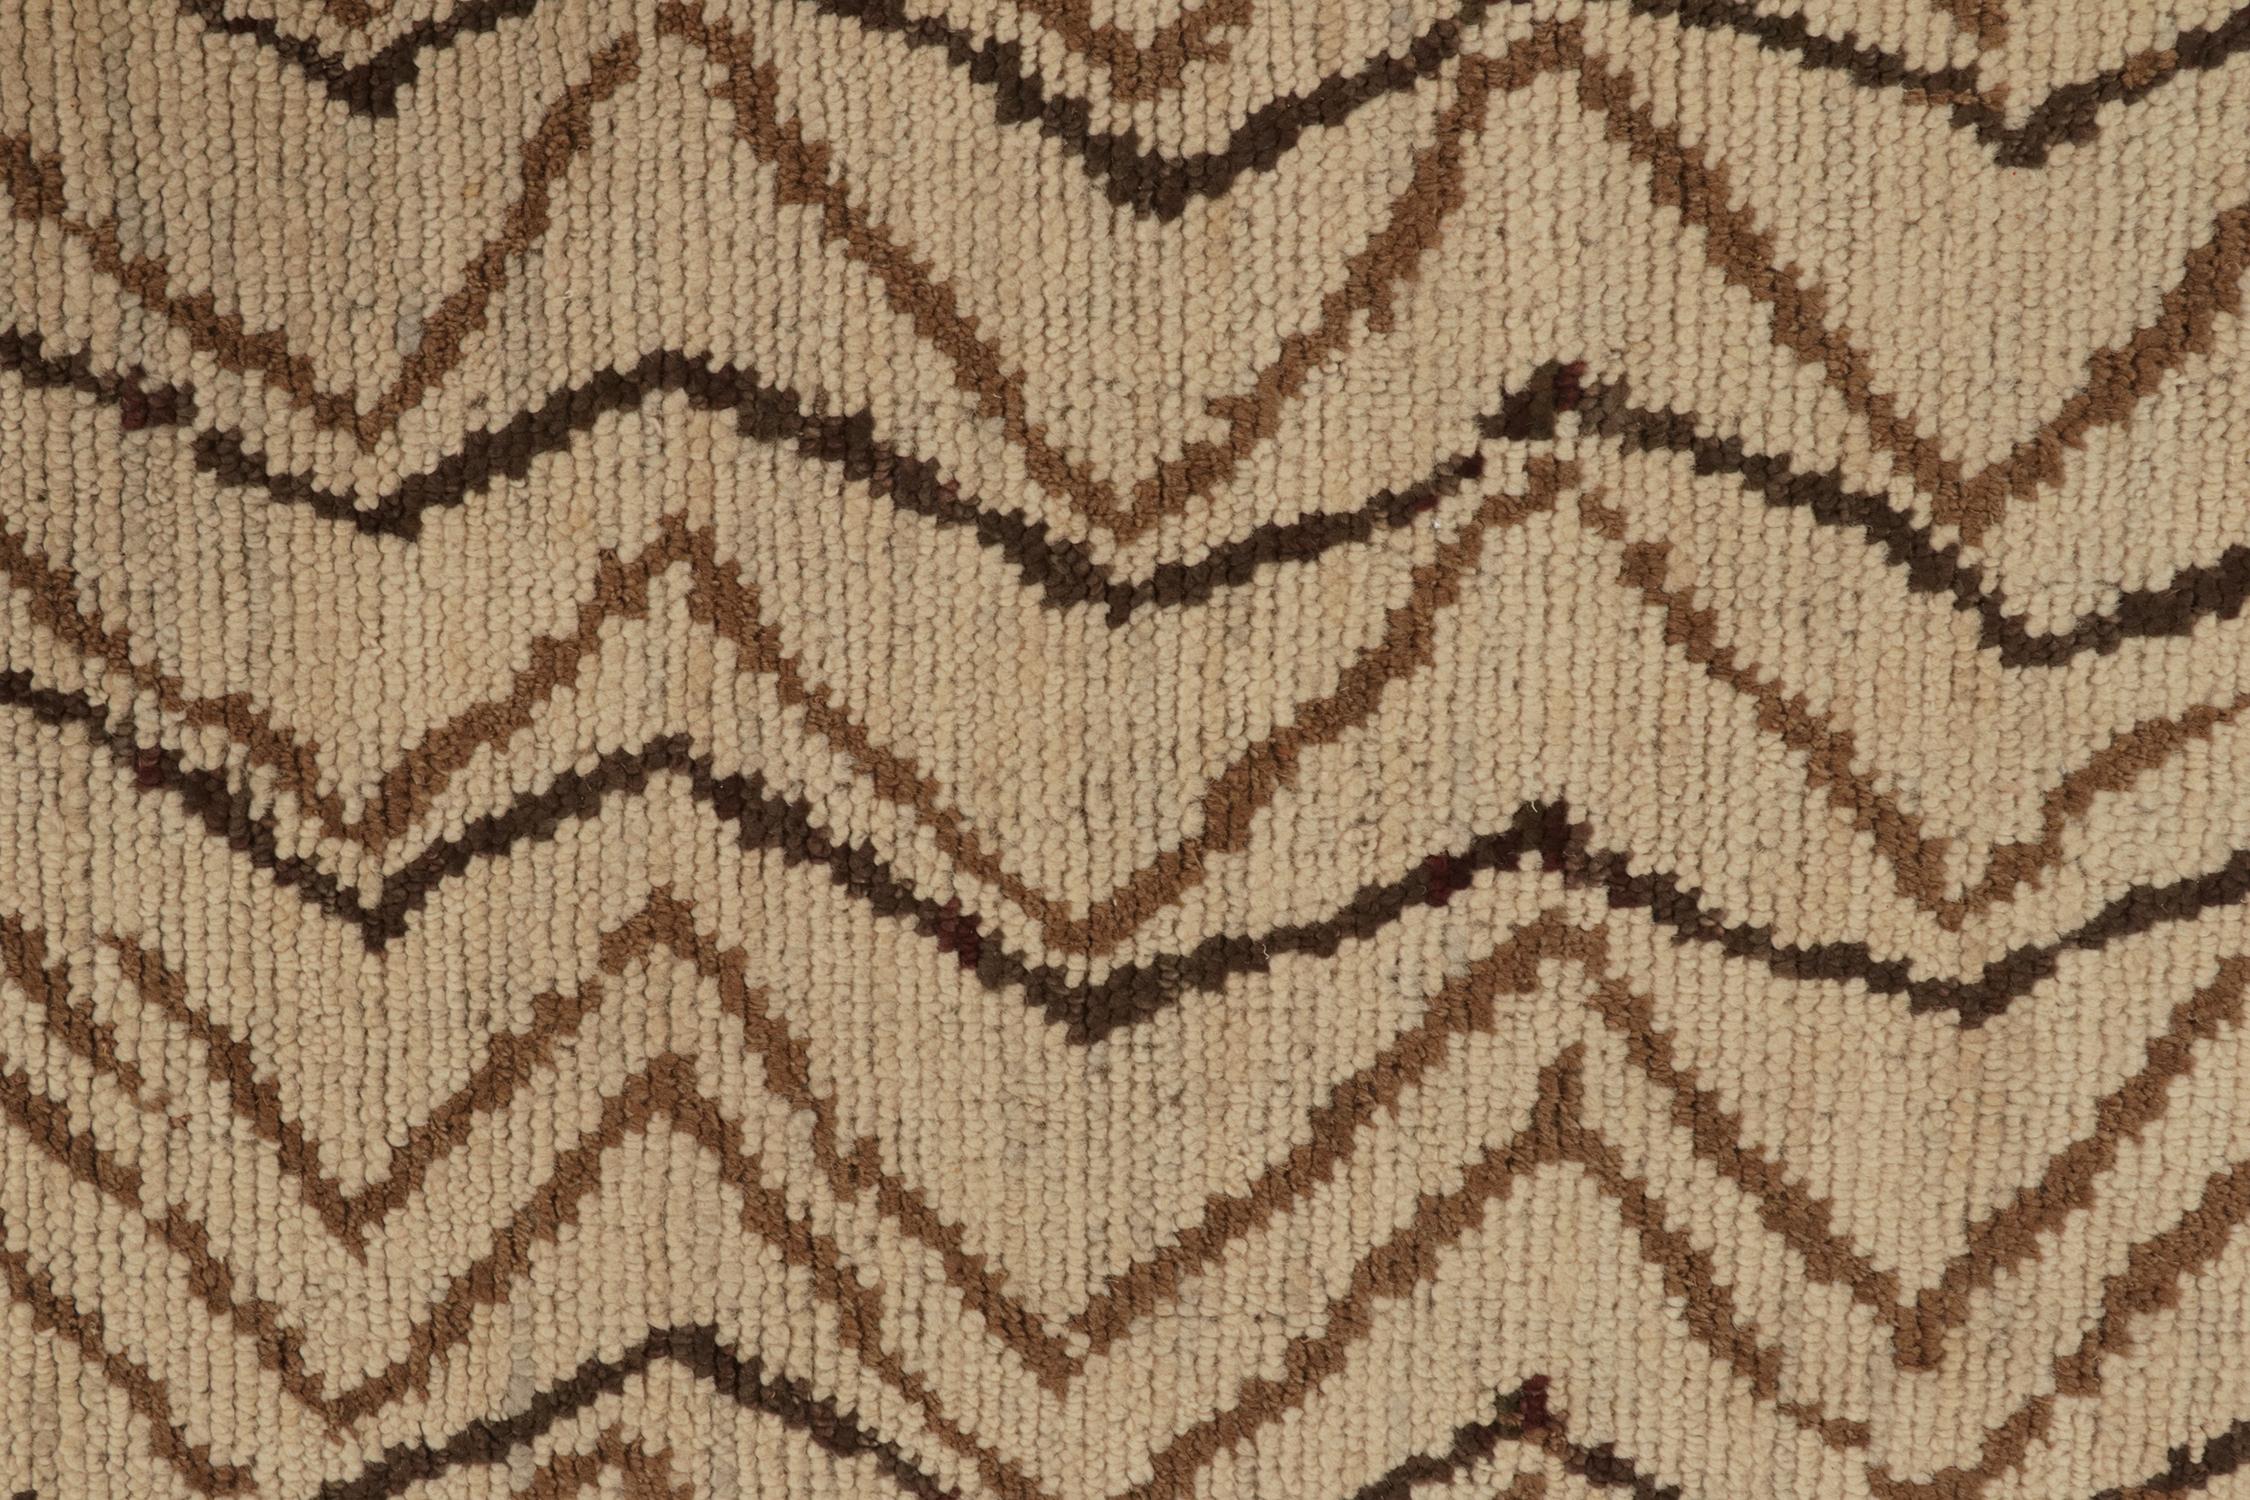 Rug & Kilim’s Moroccan Style Rug in Beige-Brown Chevrons with Gold Accents In New Condition For Sale In Long Island City, NY